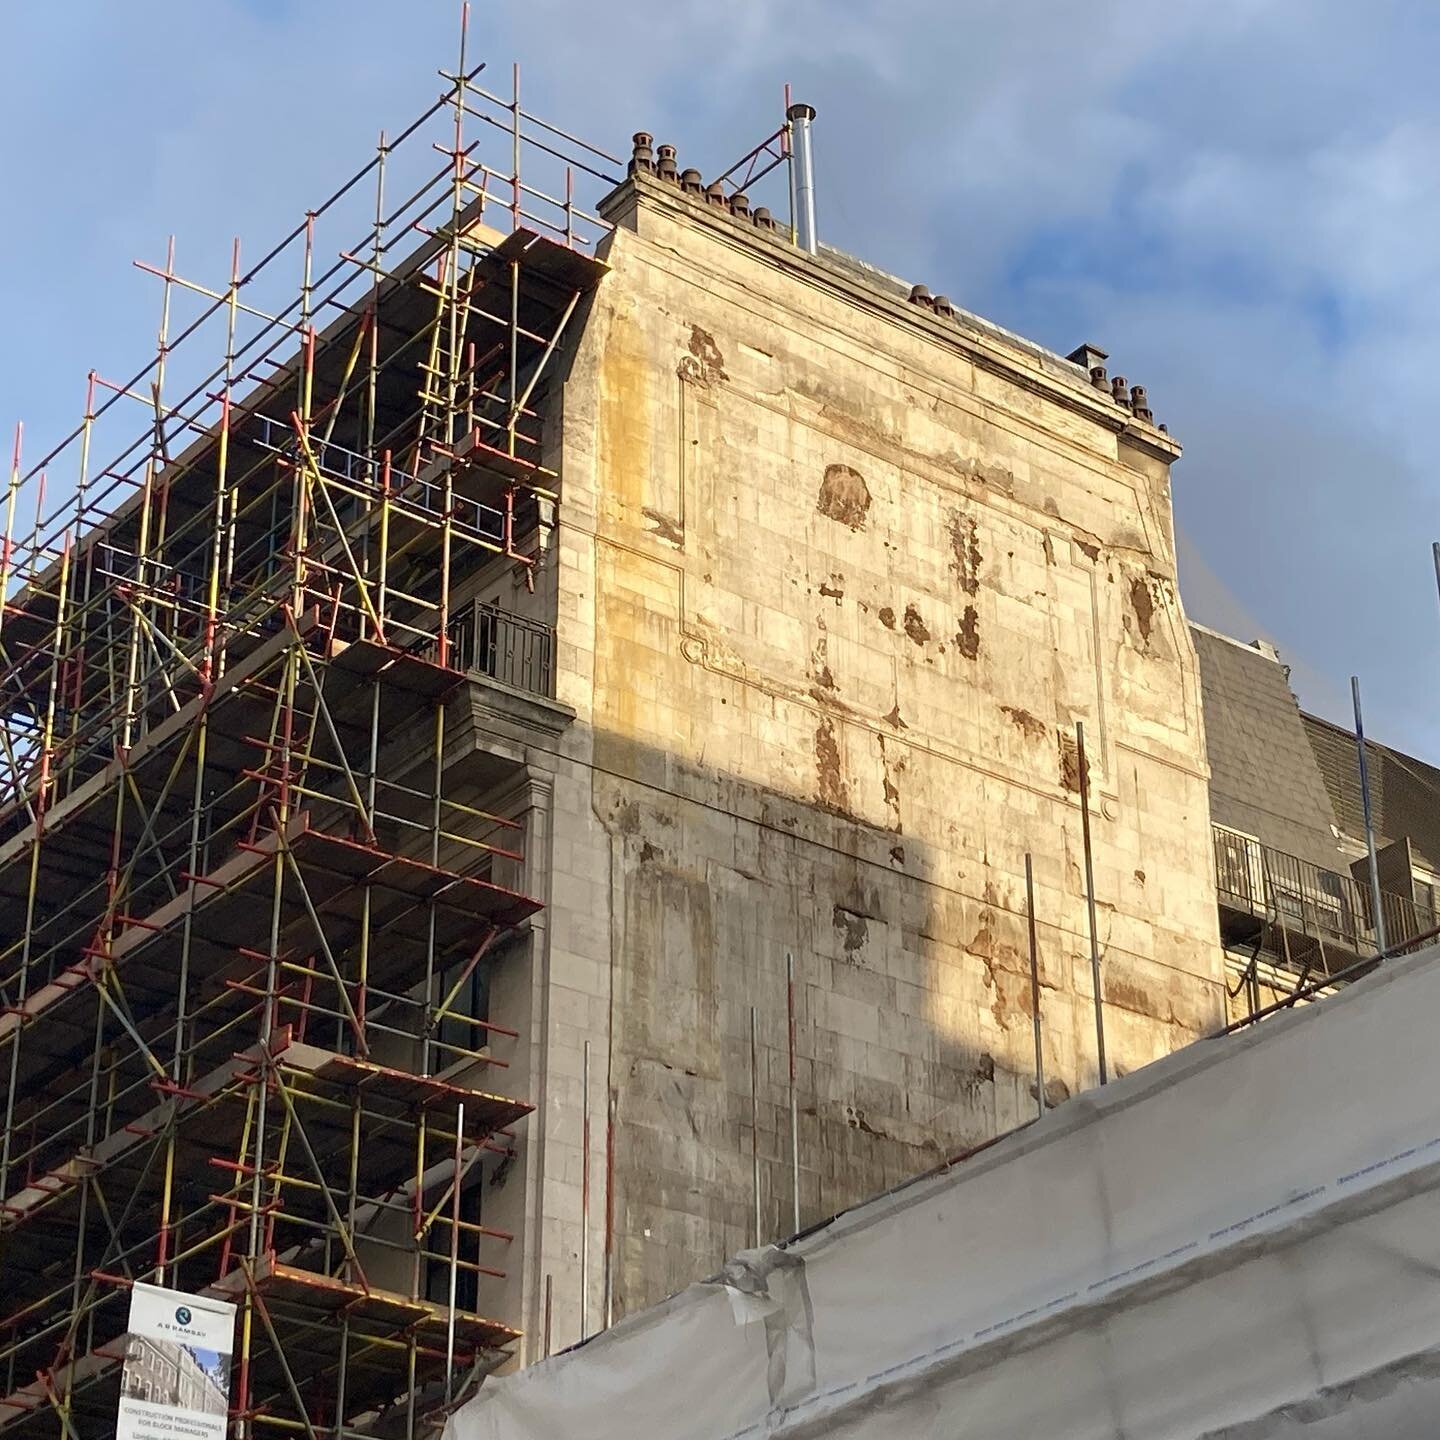 Lovely to see the sunlight bouncing off the stone facade to 204 Great Portland Street this morning. It has been covered up for the last 50 years, and will be again soon, but for now it&rsquo;s having its moment in the sun.